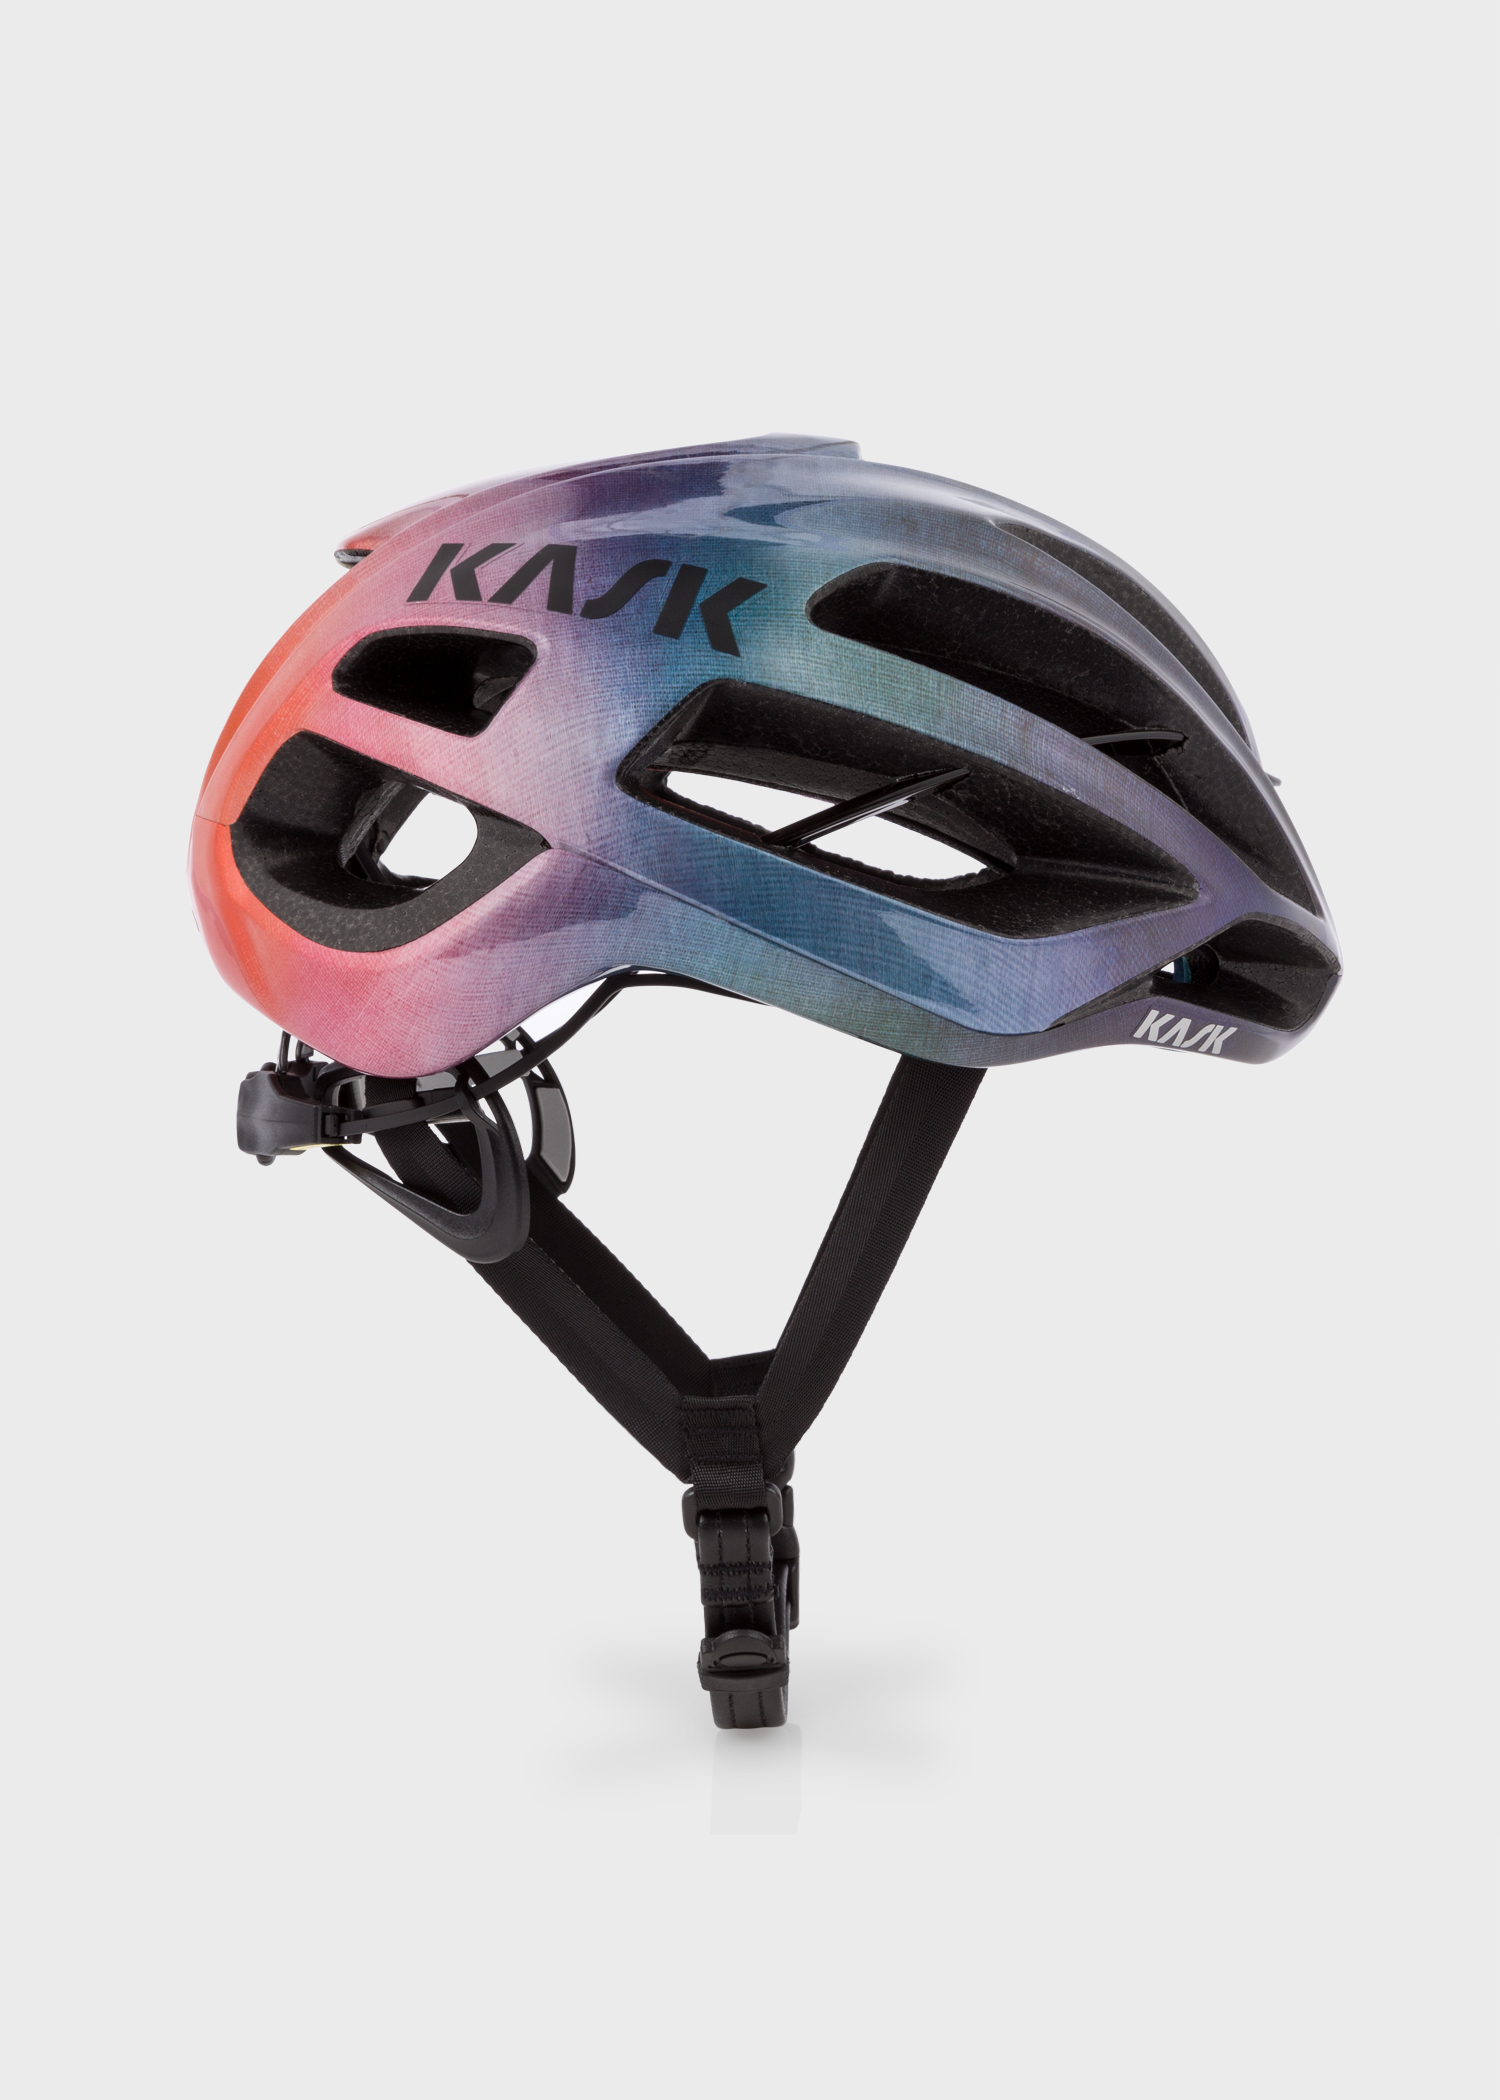 Gucci Bianchi Bicycle Road Bike Men's Helmet made by KASK